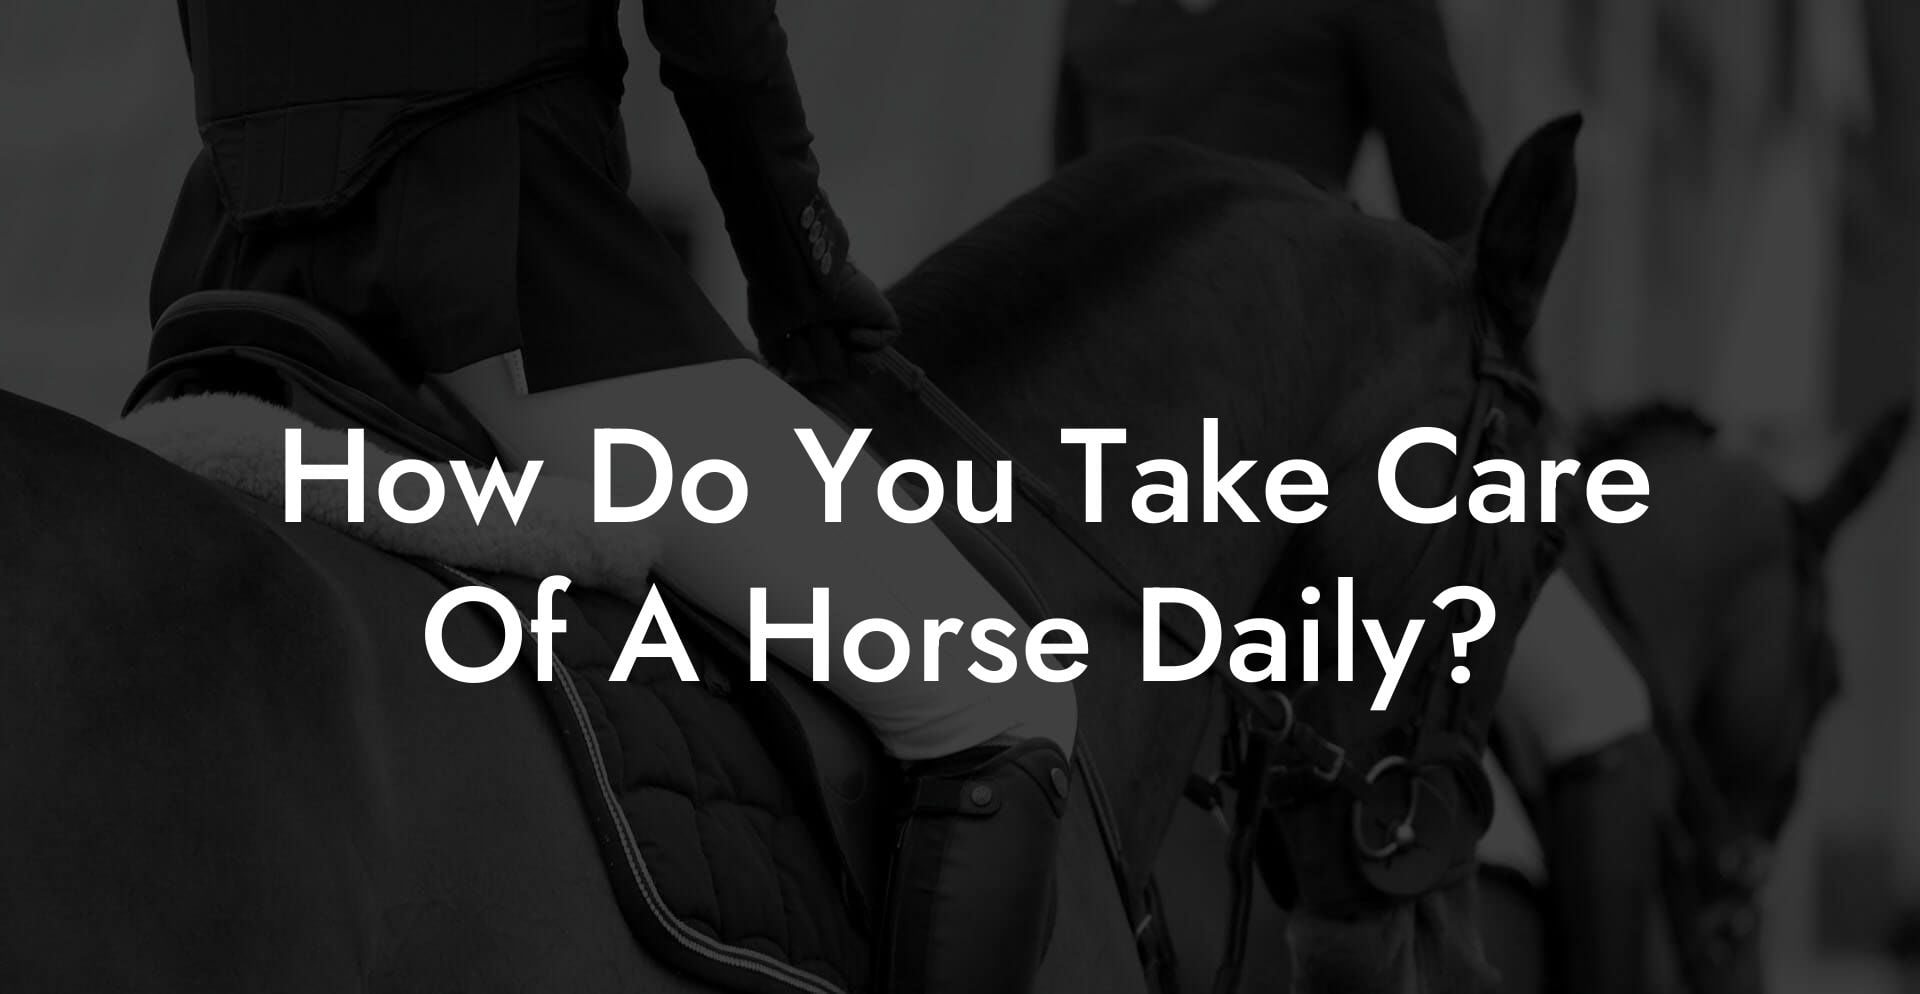 How Do You Take Care Of A Horse Daily?